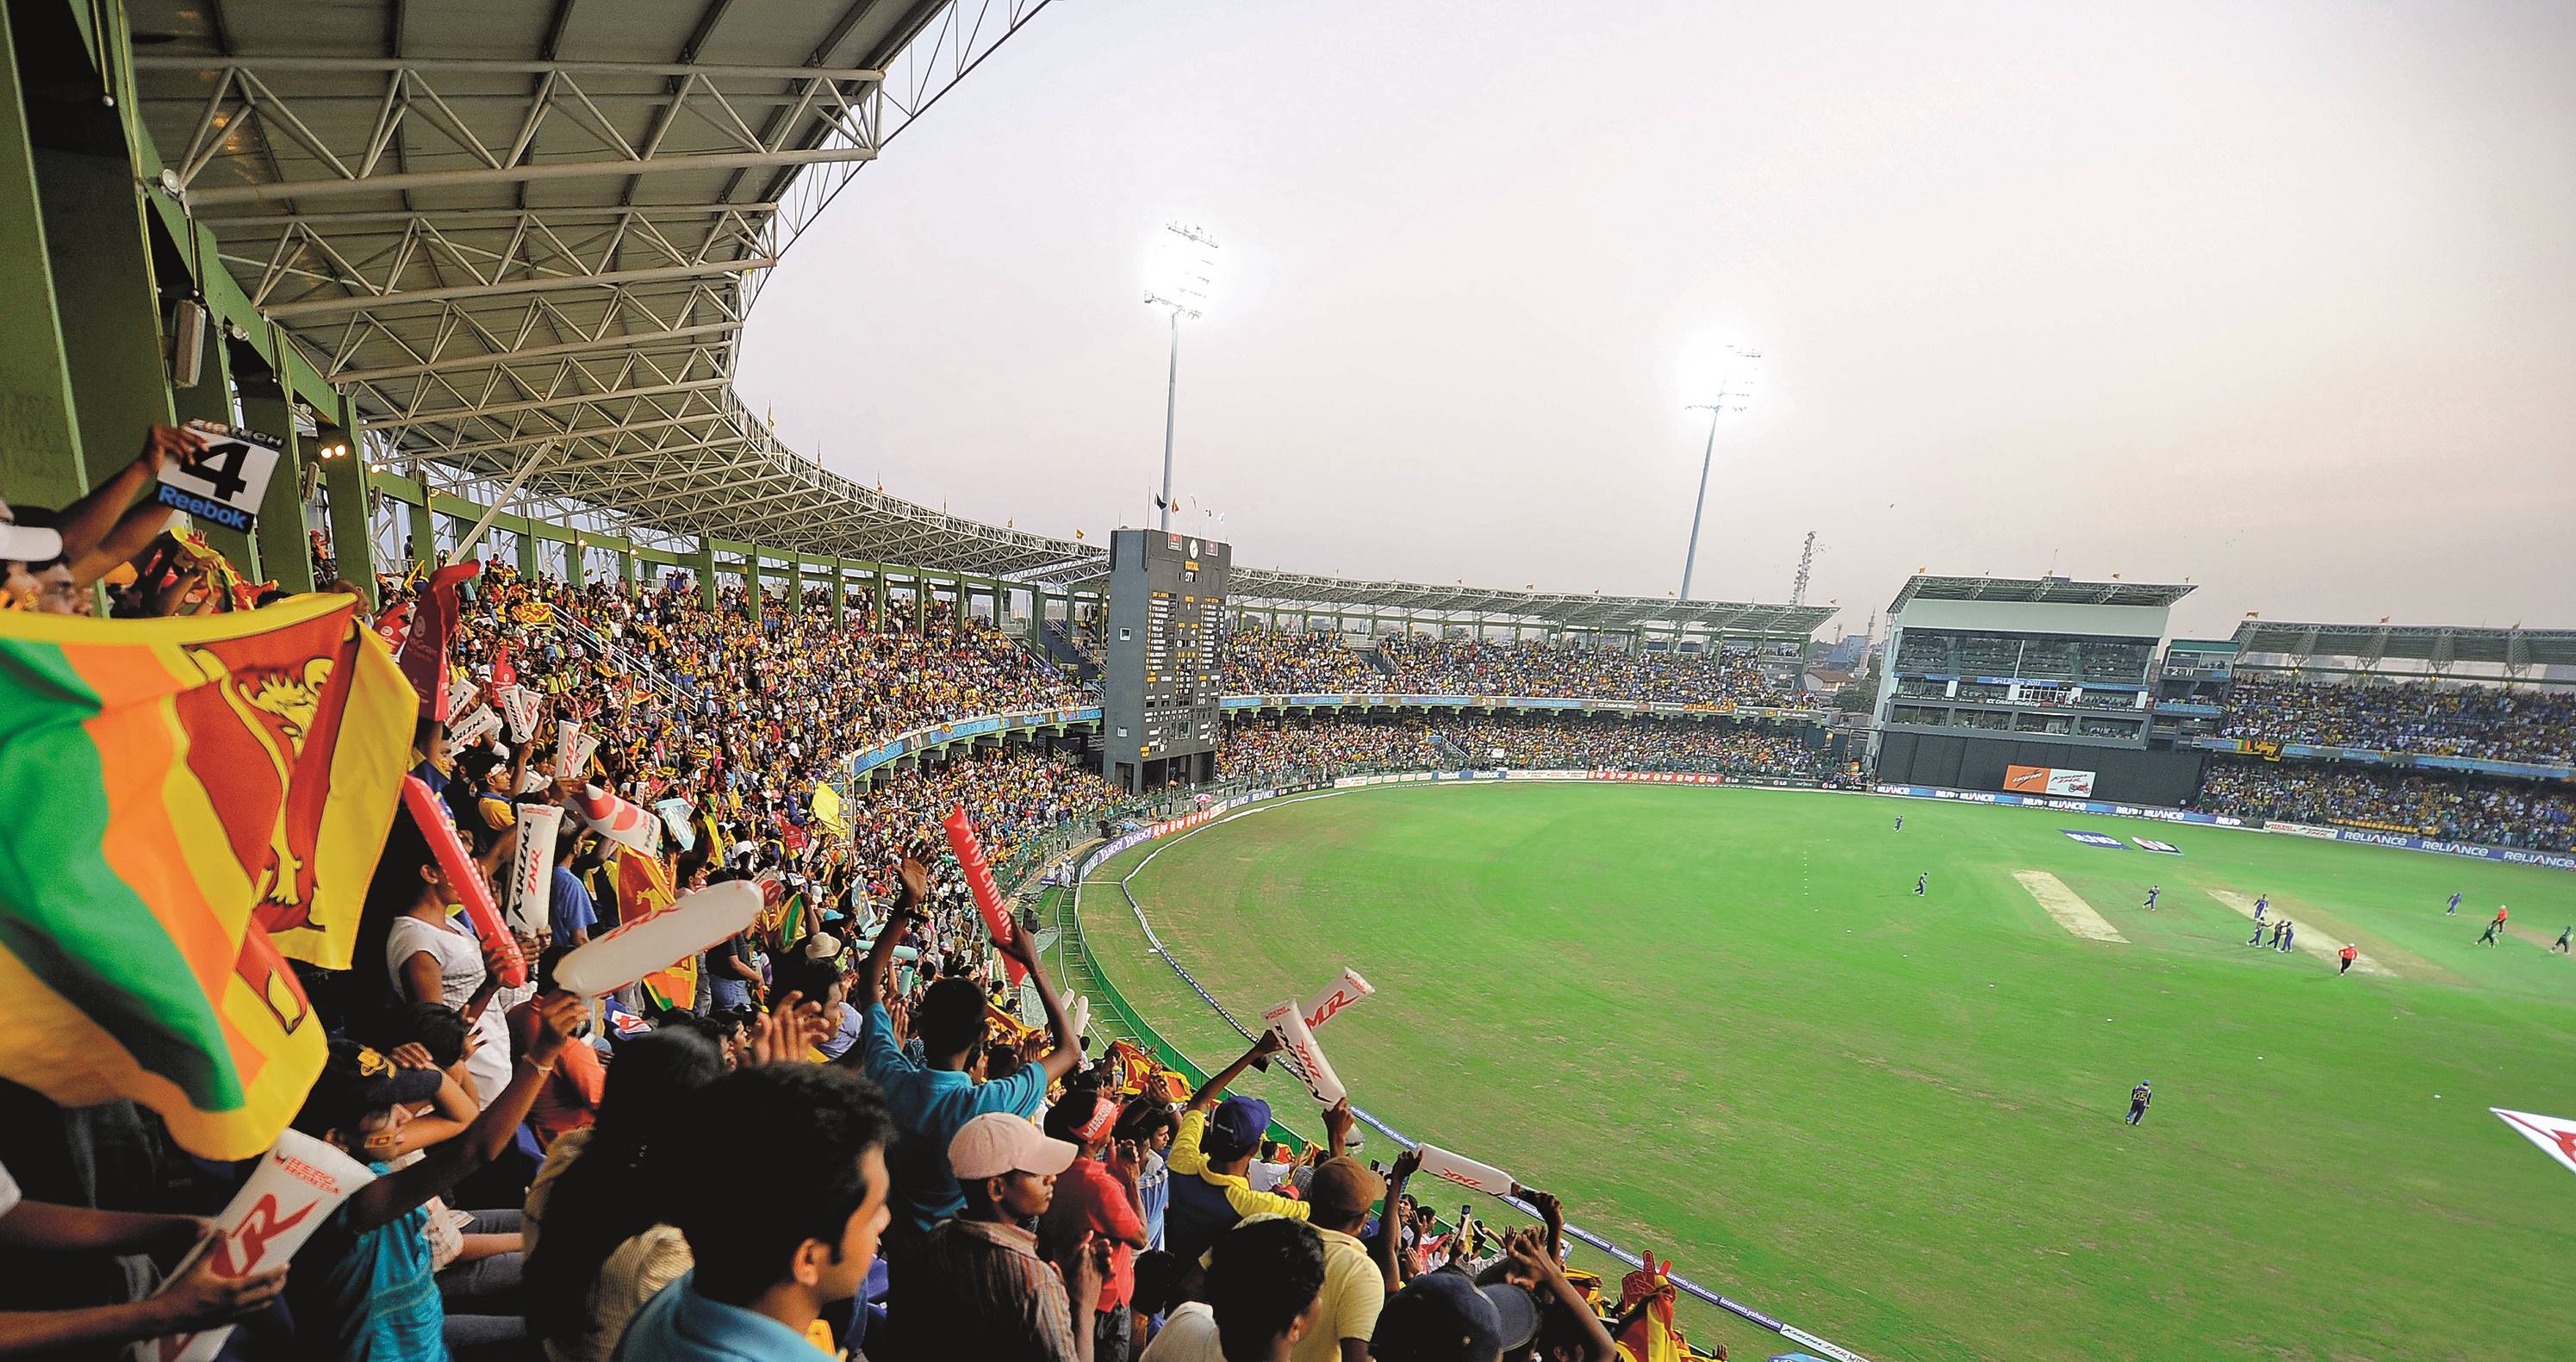 Cricket to recommence at R. Premadasa Stadium in 2021 following total refurbishment